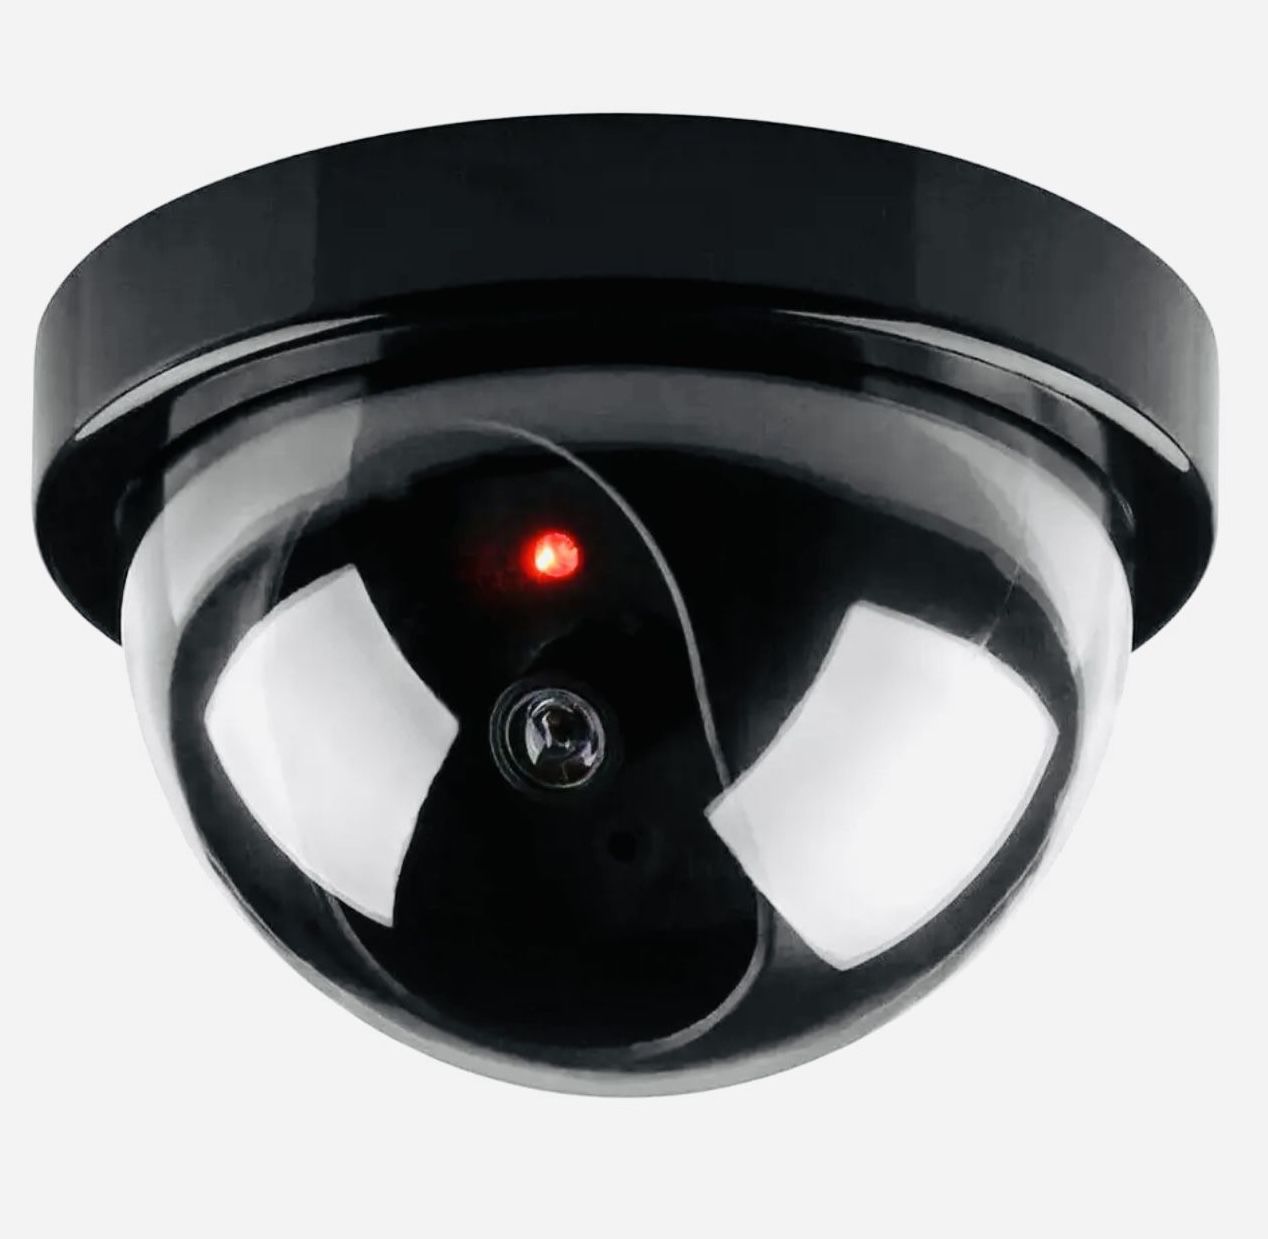 Fake Security Camera With Realistic LED Red Light. Just Enough To Scare Them Away.